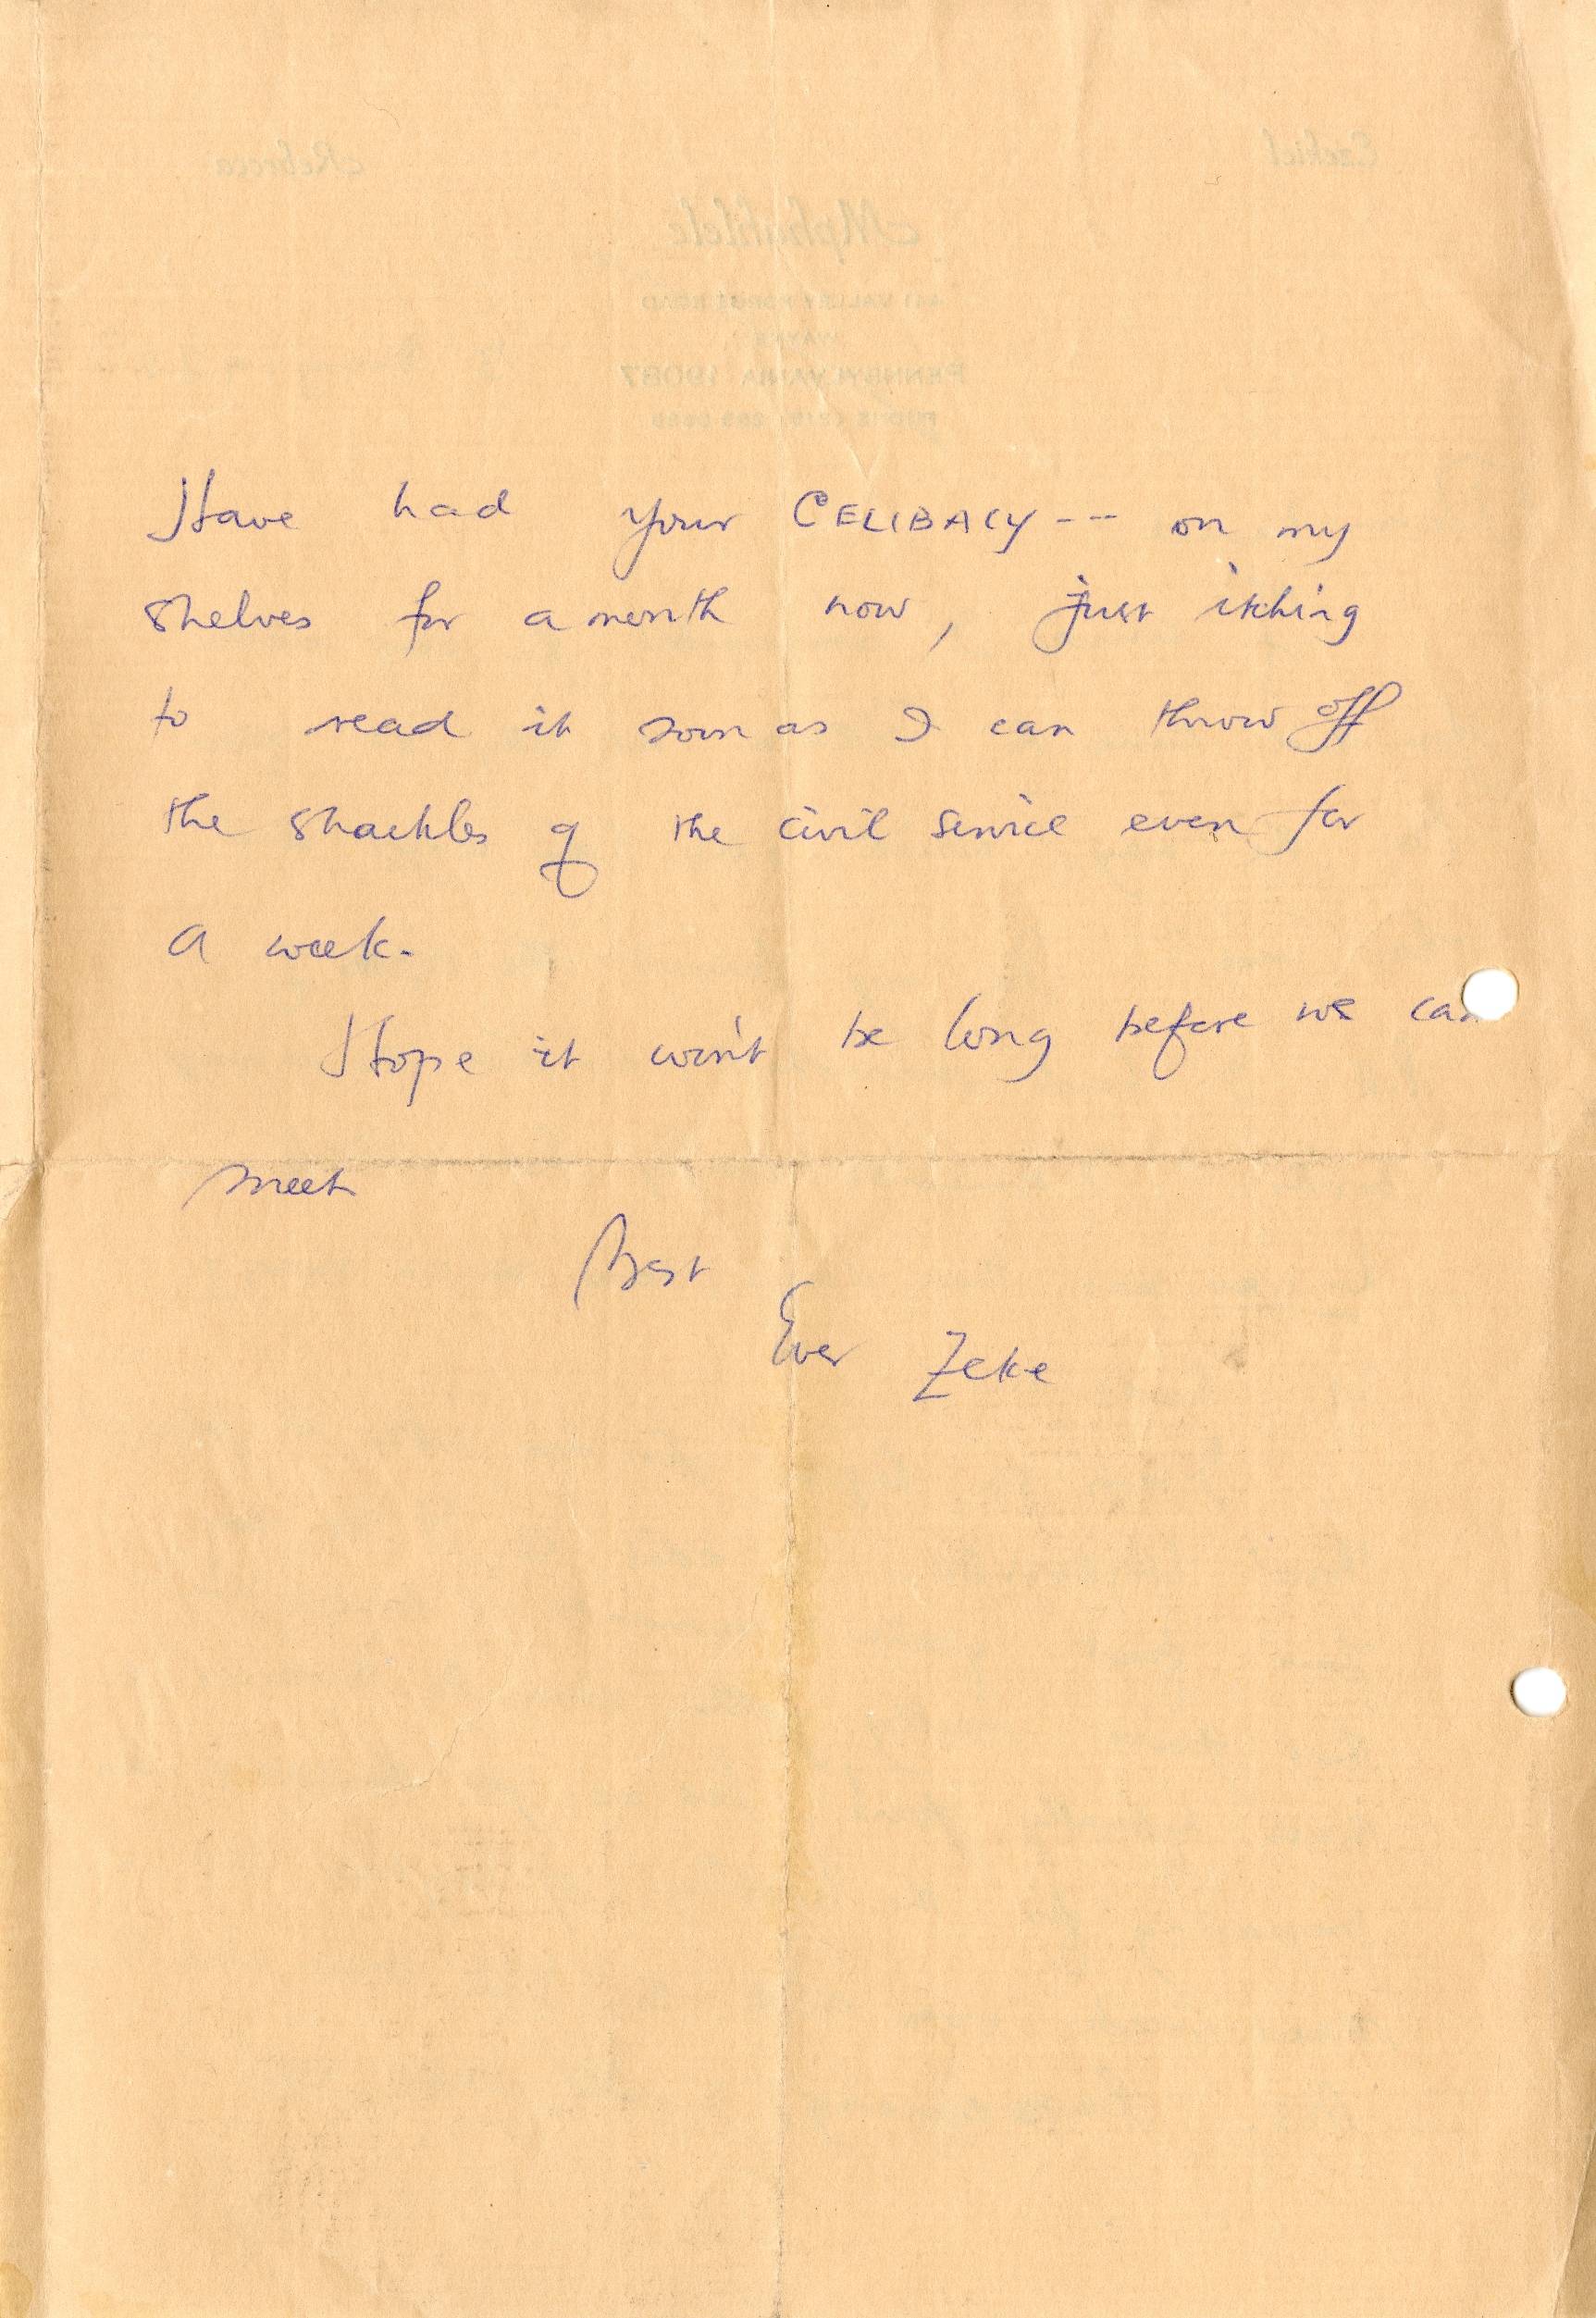 Correspondence between Mphahlele and Lionel Abrahams, who edited <em>Chirundu</em>. Abrahams was a respected South African writer.